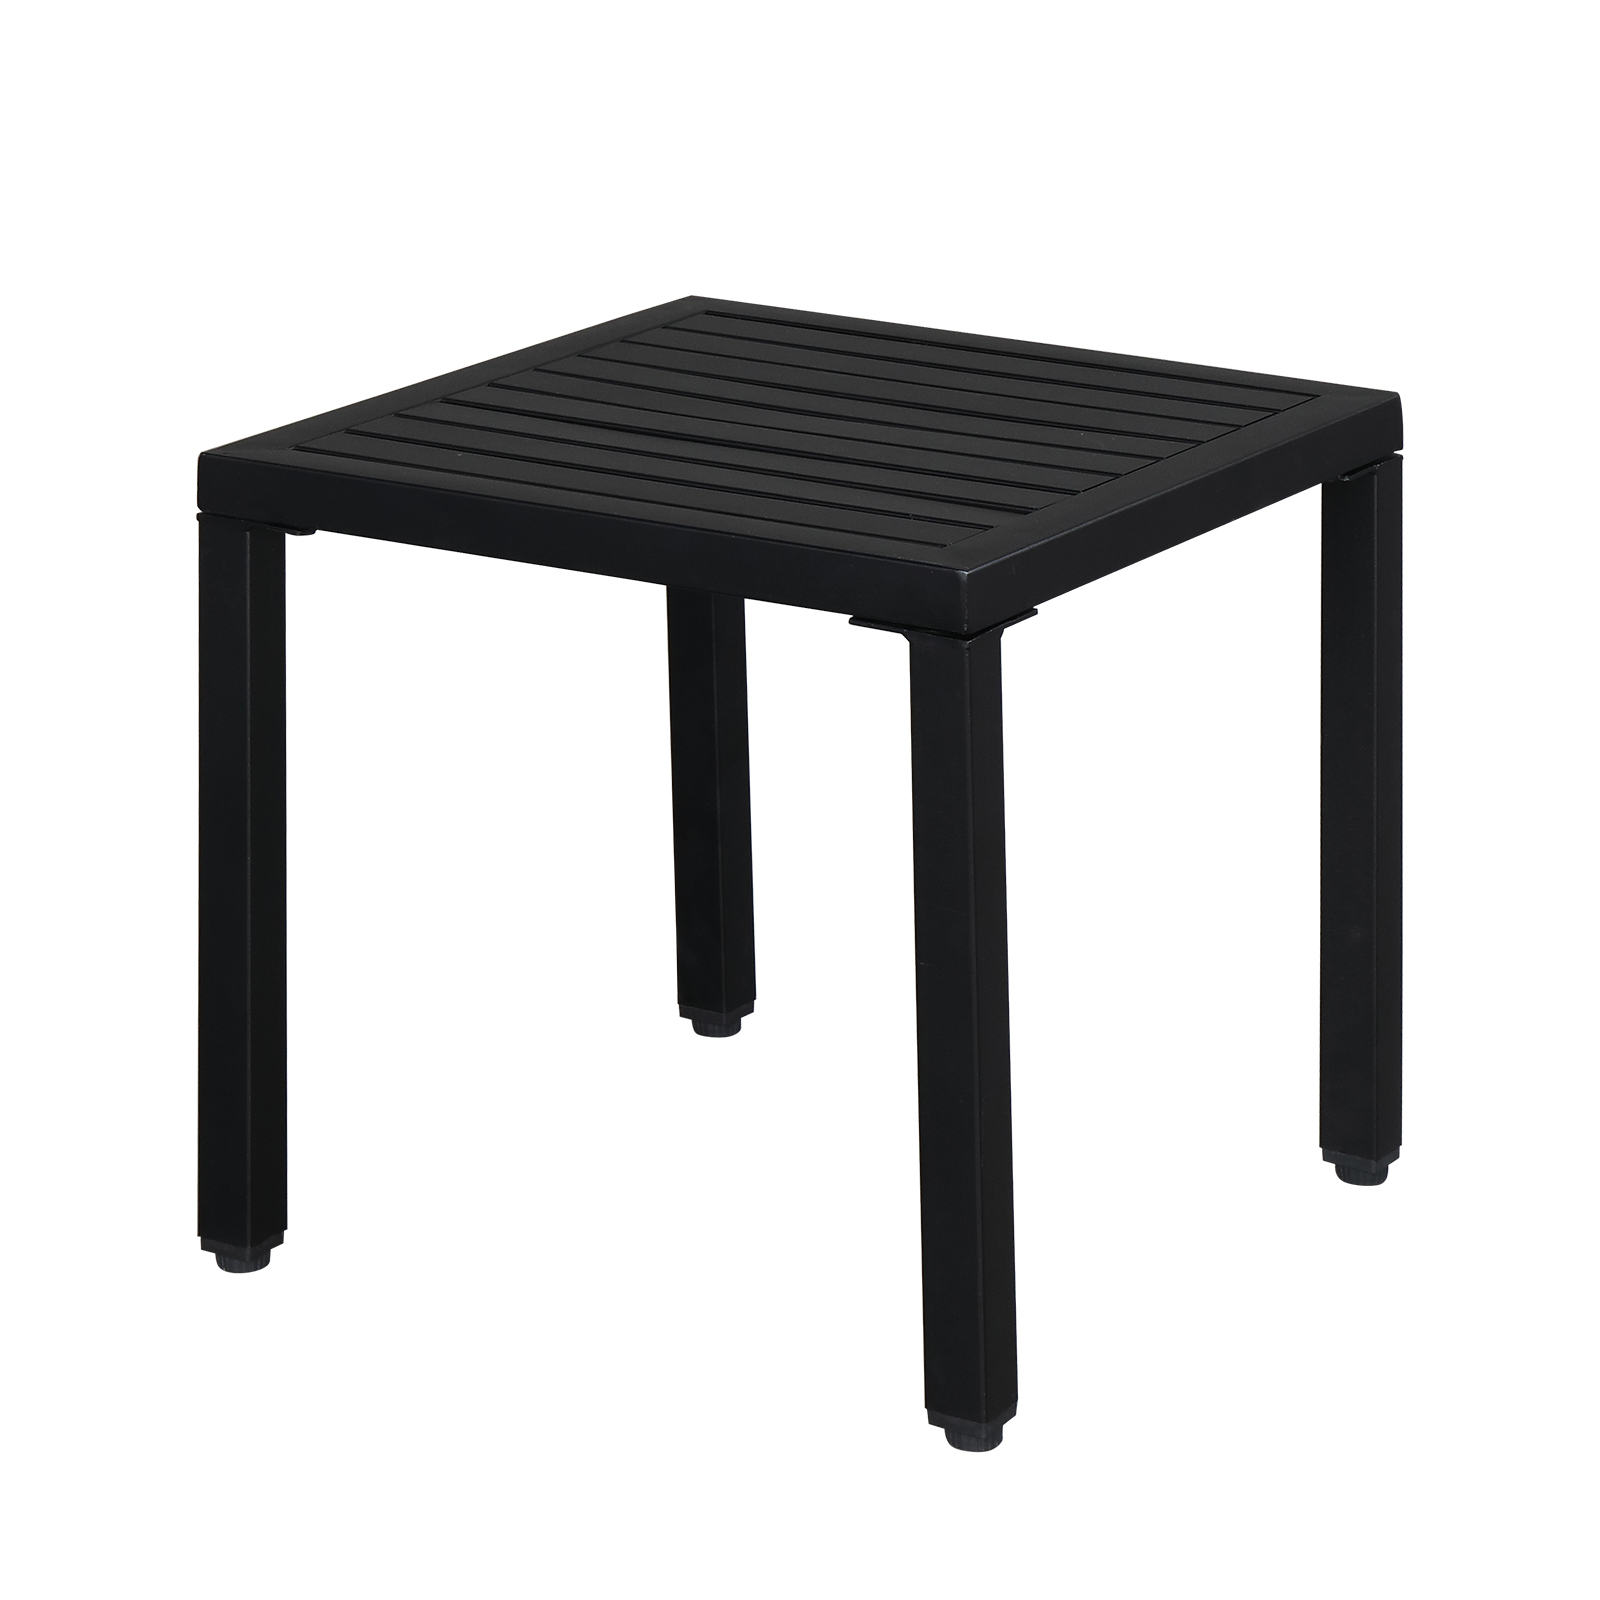 Metal Patio Table, BTMWAY Outdoor Dining Table Square Iron Bar Table, All-weather Outside Conversation Coffee Table with Metal Frame, Black Bistro Side Table for Garden Pool Lawn Balcony - image 5 of 11